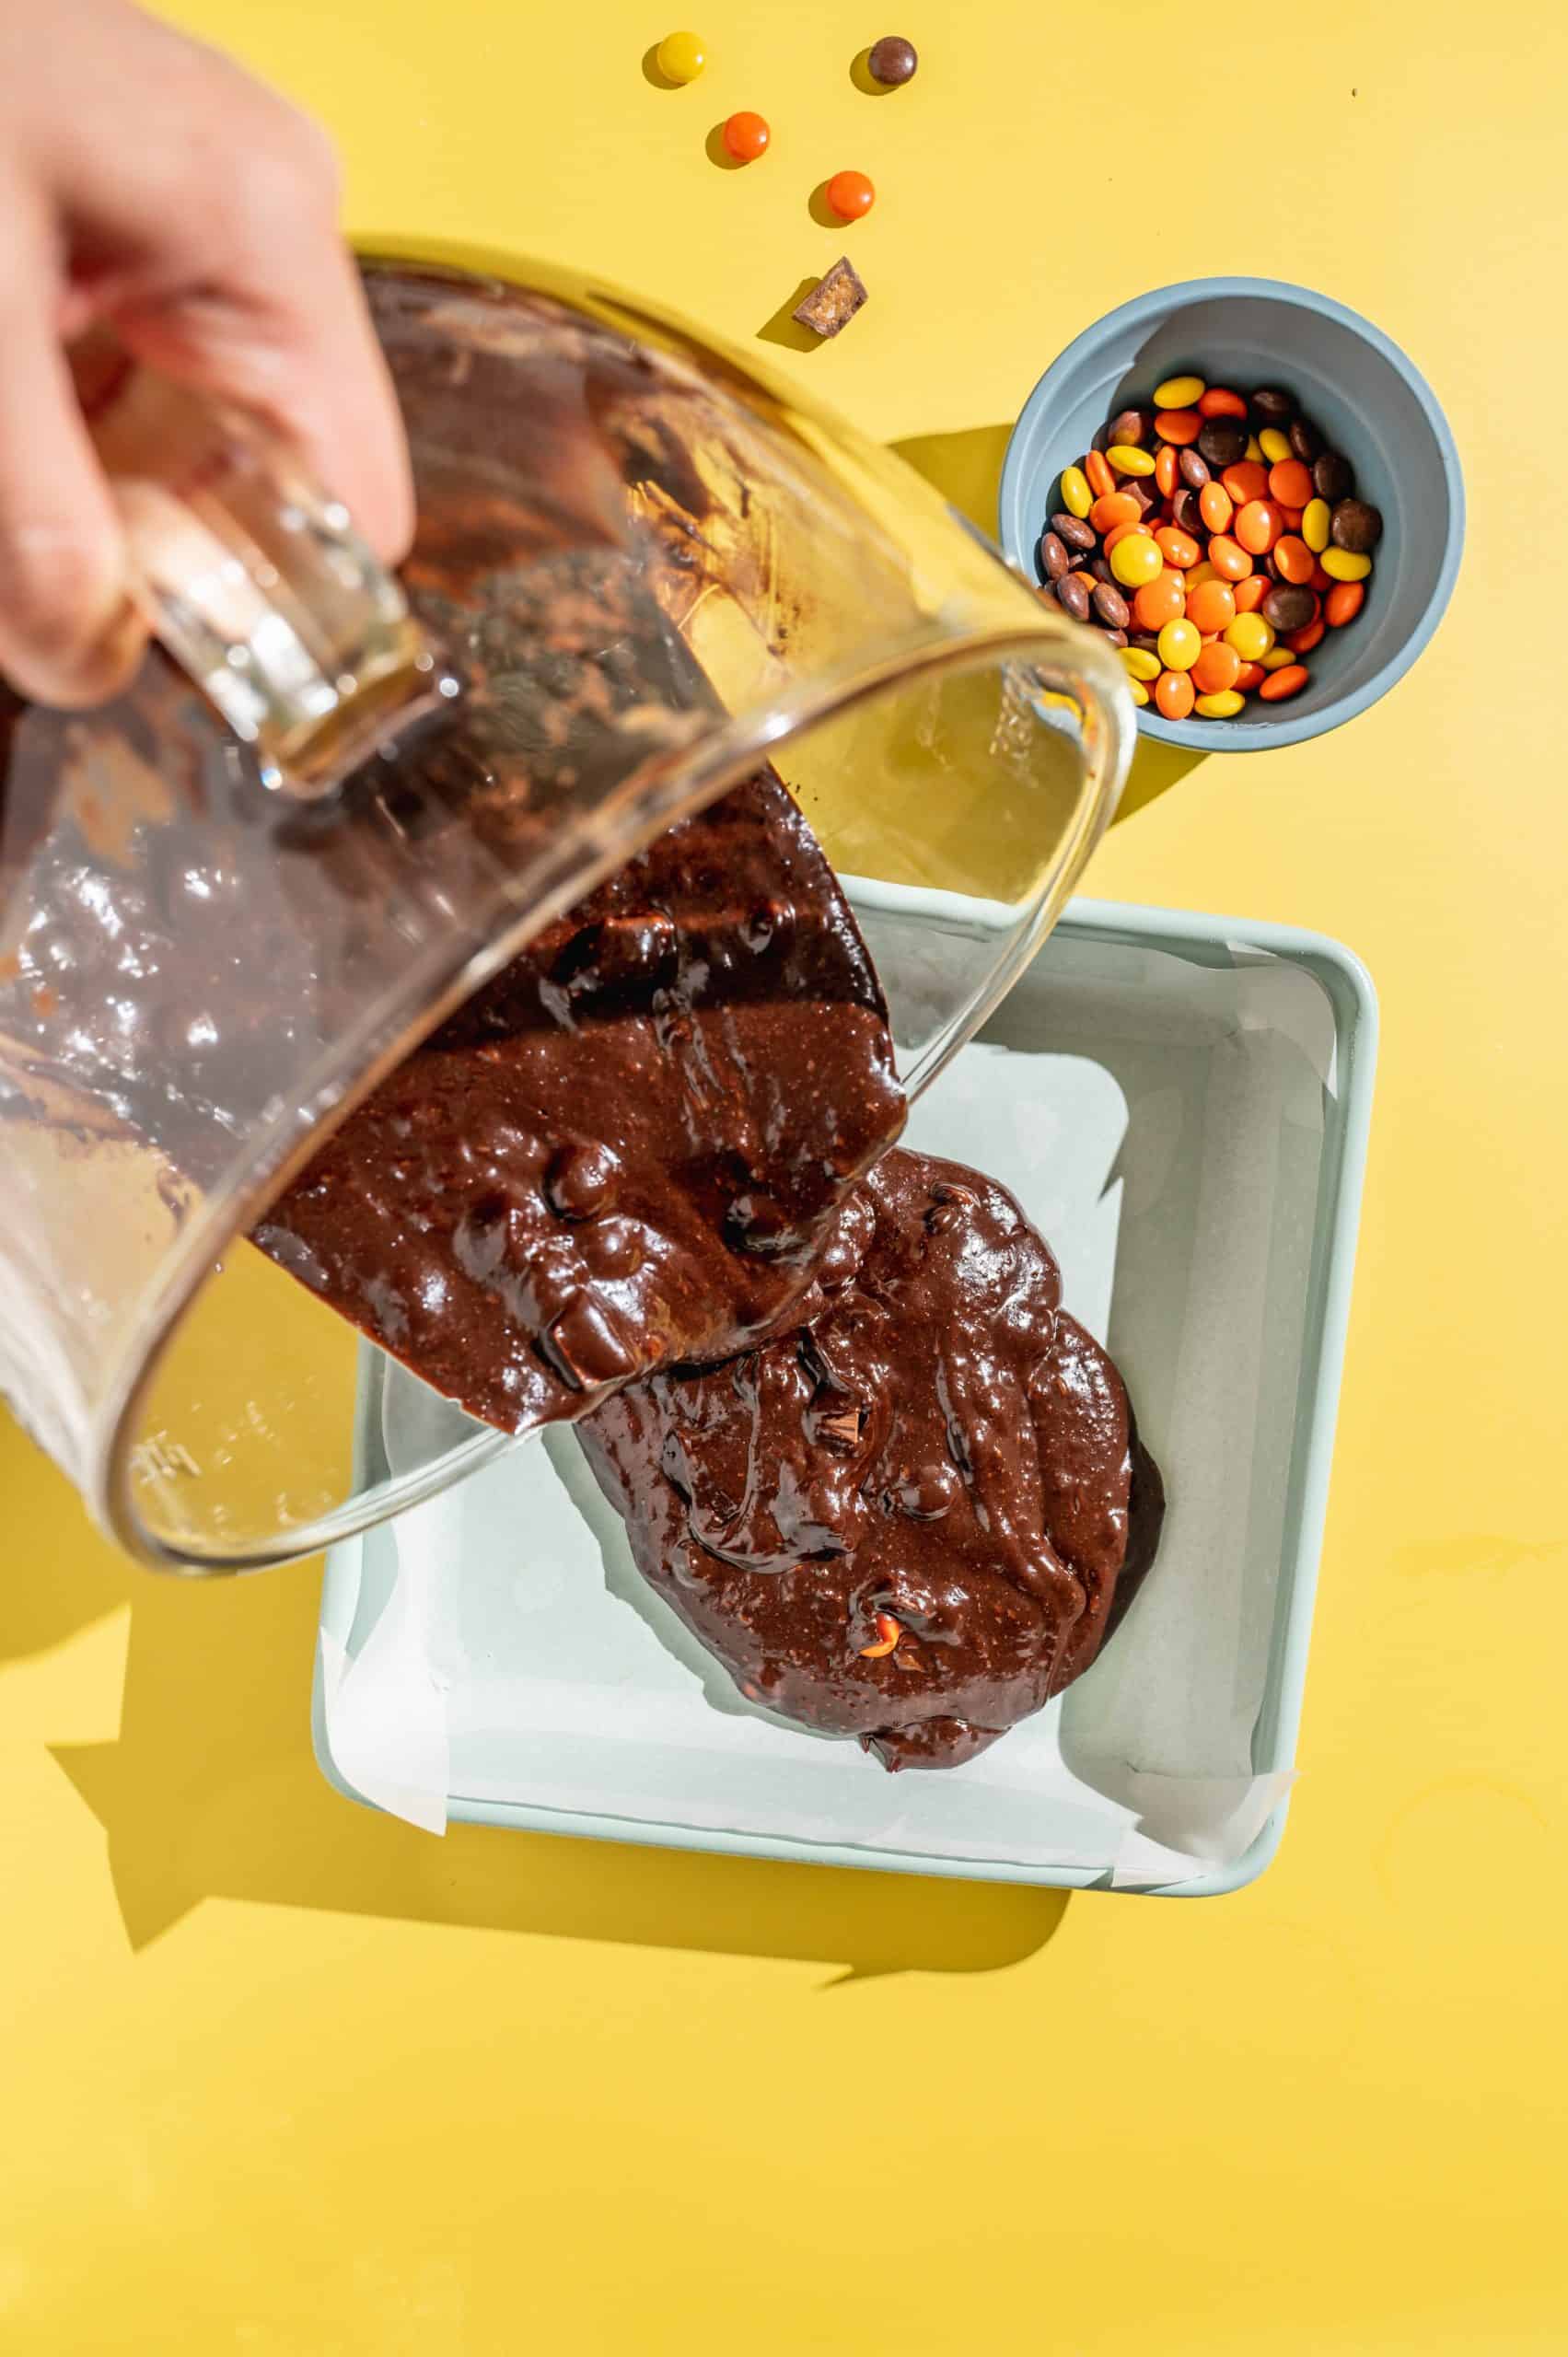 Pouring Reeses pieces brownie batter into a square baking pan lined with parchment paper.